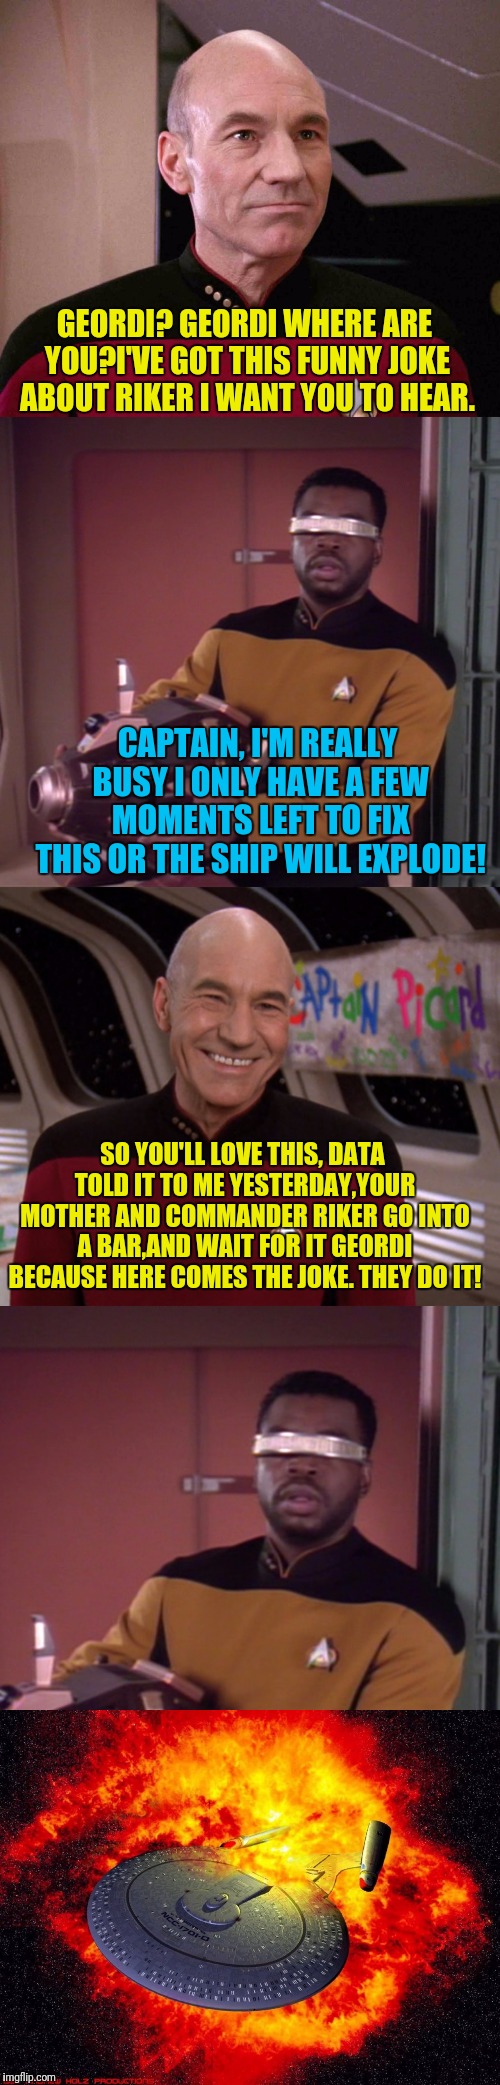 Picard is Bad At Joking | GEORDI? GEORDI WHERE ARE YOU?I'VE GOT THIS FUNNY JOKE ABOUT RIKER I WANT YOU TO HEAR. CAPTAIN, I'M REALLY BUSY I ONLY HAVE A FEW MOMENTS LEFT TO FIX THIS OR THE SHIP WILL EXPLODE! SO YOU'LL LOVE THIS, DATA TOLD IT TO ME YESTERDAY,YOUR MOTHER AND COMMANDER RIKER GO INTO A BAR,AND WAIT FOR IT GEORDI BECAUSE HERE COMES THE JOKE. THEY DO IT! | image tagged in star trek the next generation,picard,captain picard,bad joke | made w/ Imgflip meme maker